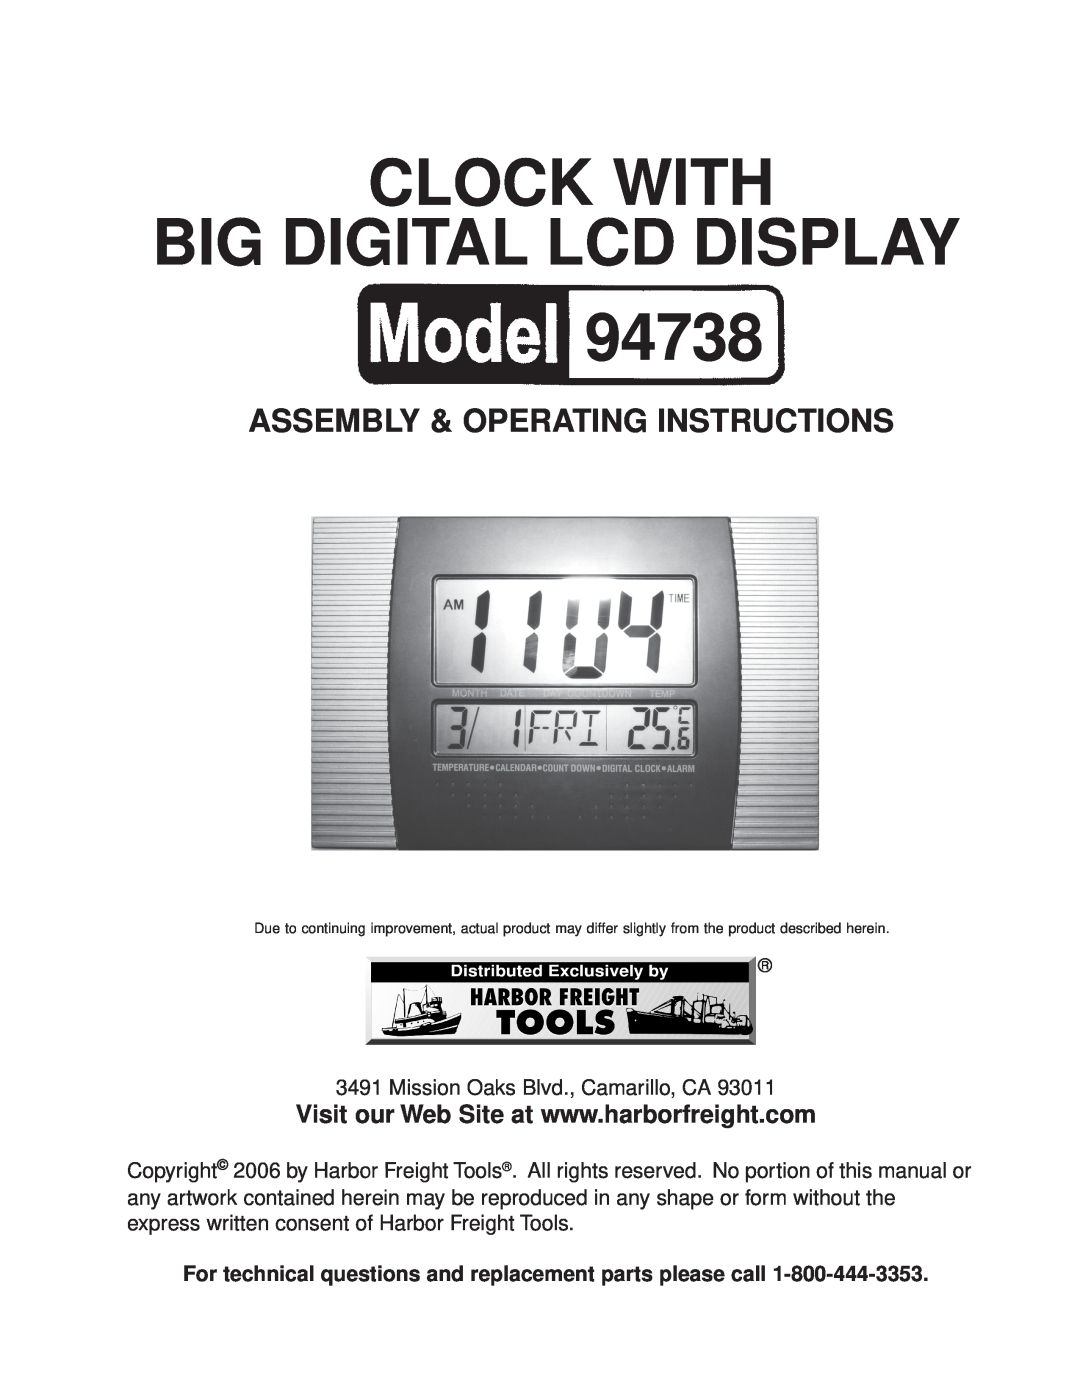 Harbor Freight Tools 94738 manual Clock With Big Digital Lcd Display, Assembly & Operating Instructions 